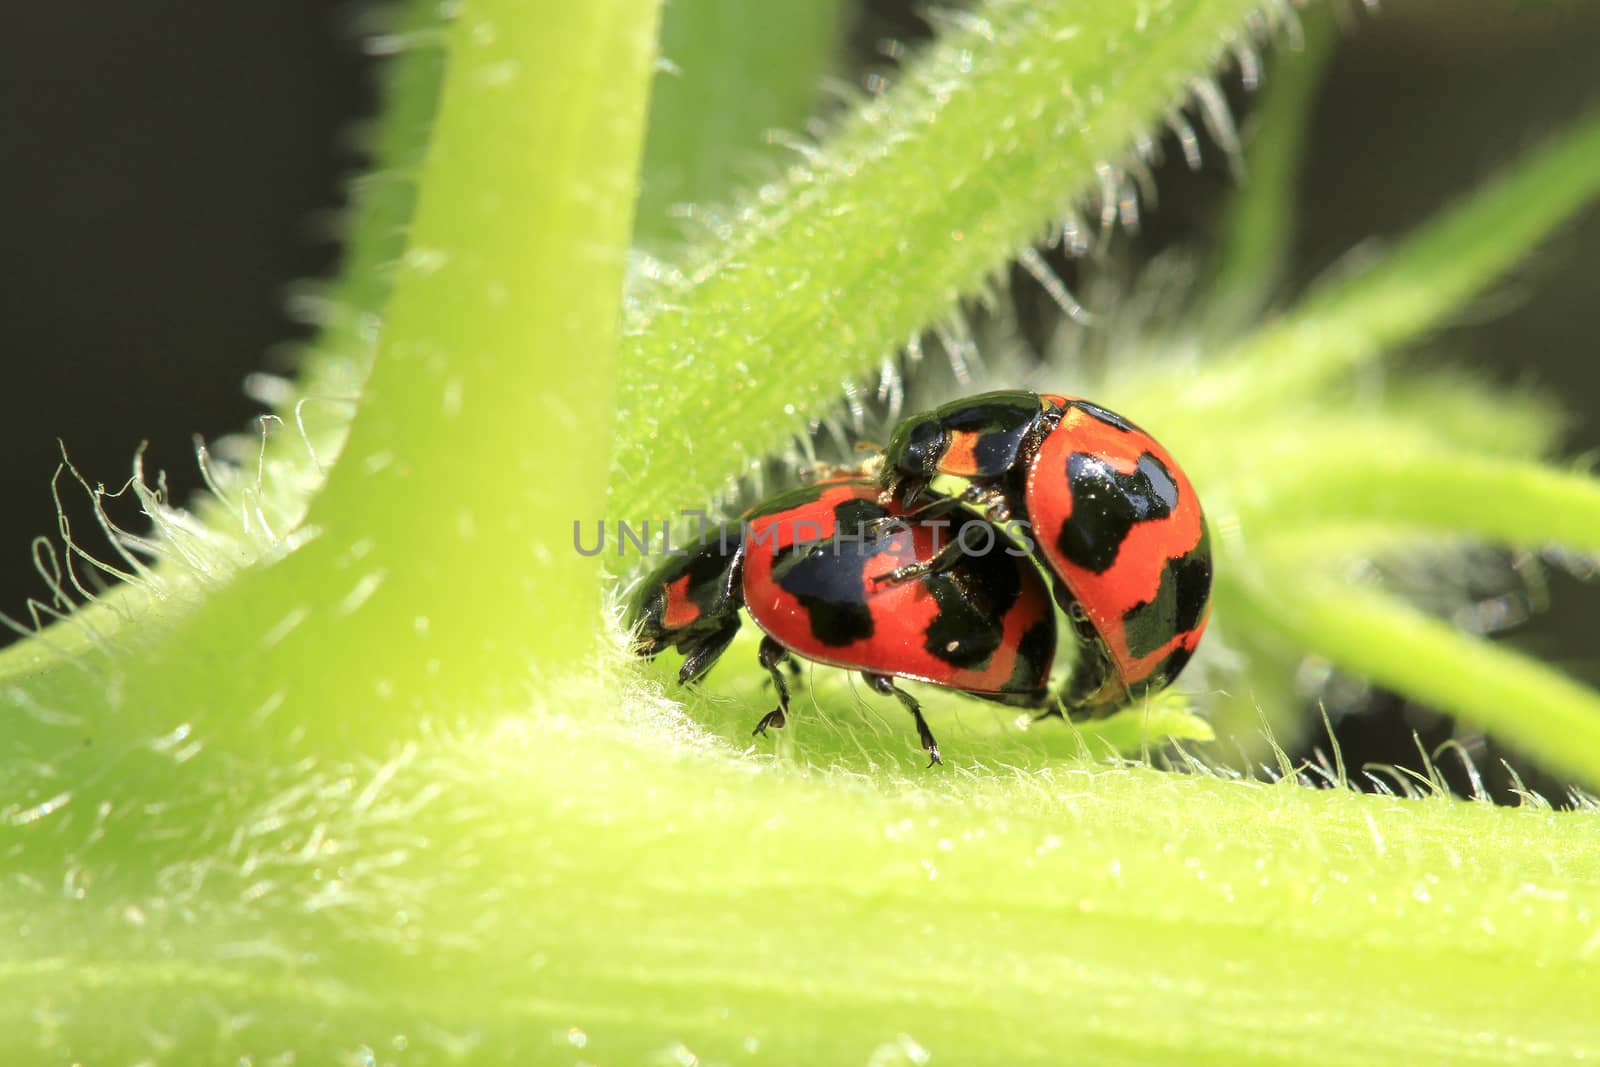 Ladybug mating in the gardens in close up